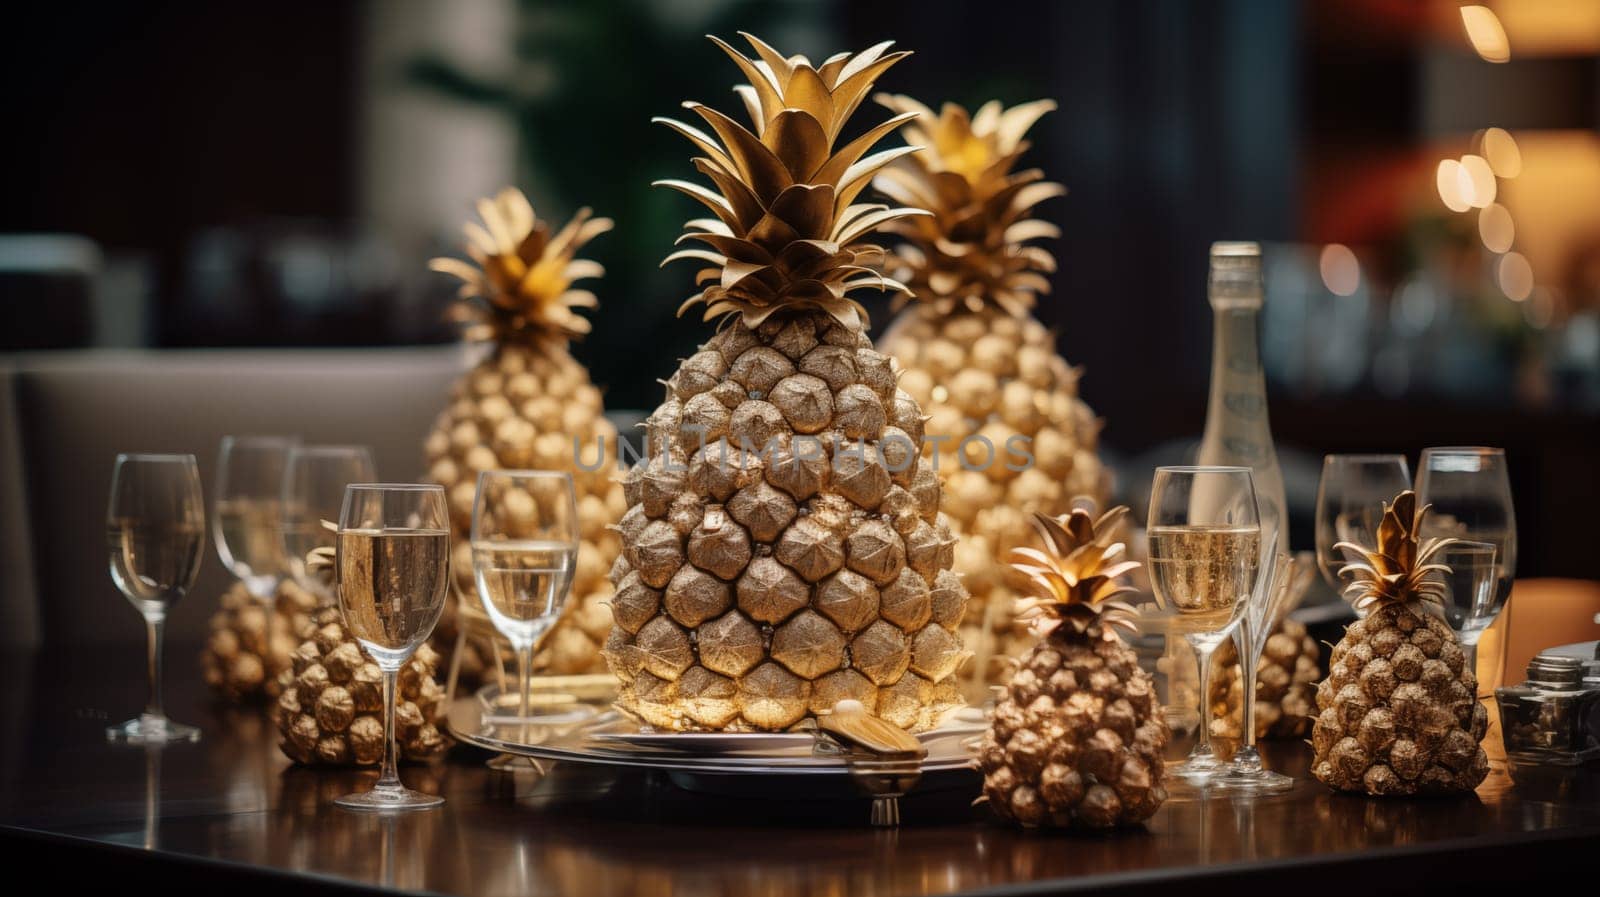 golden pineapples stand on plates on the table, next to glasses of champagne by Zakharova